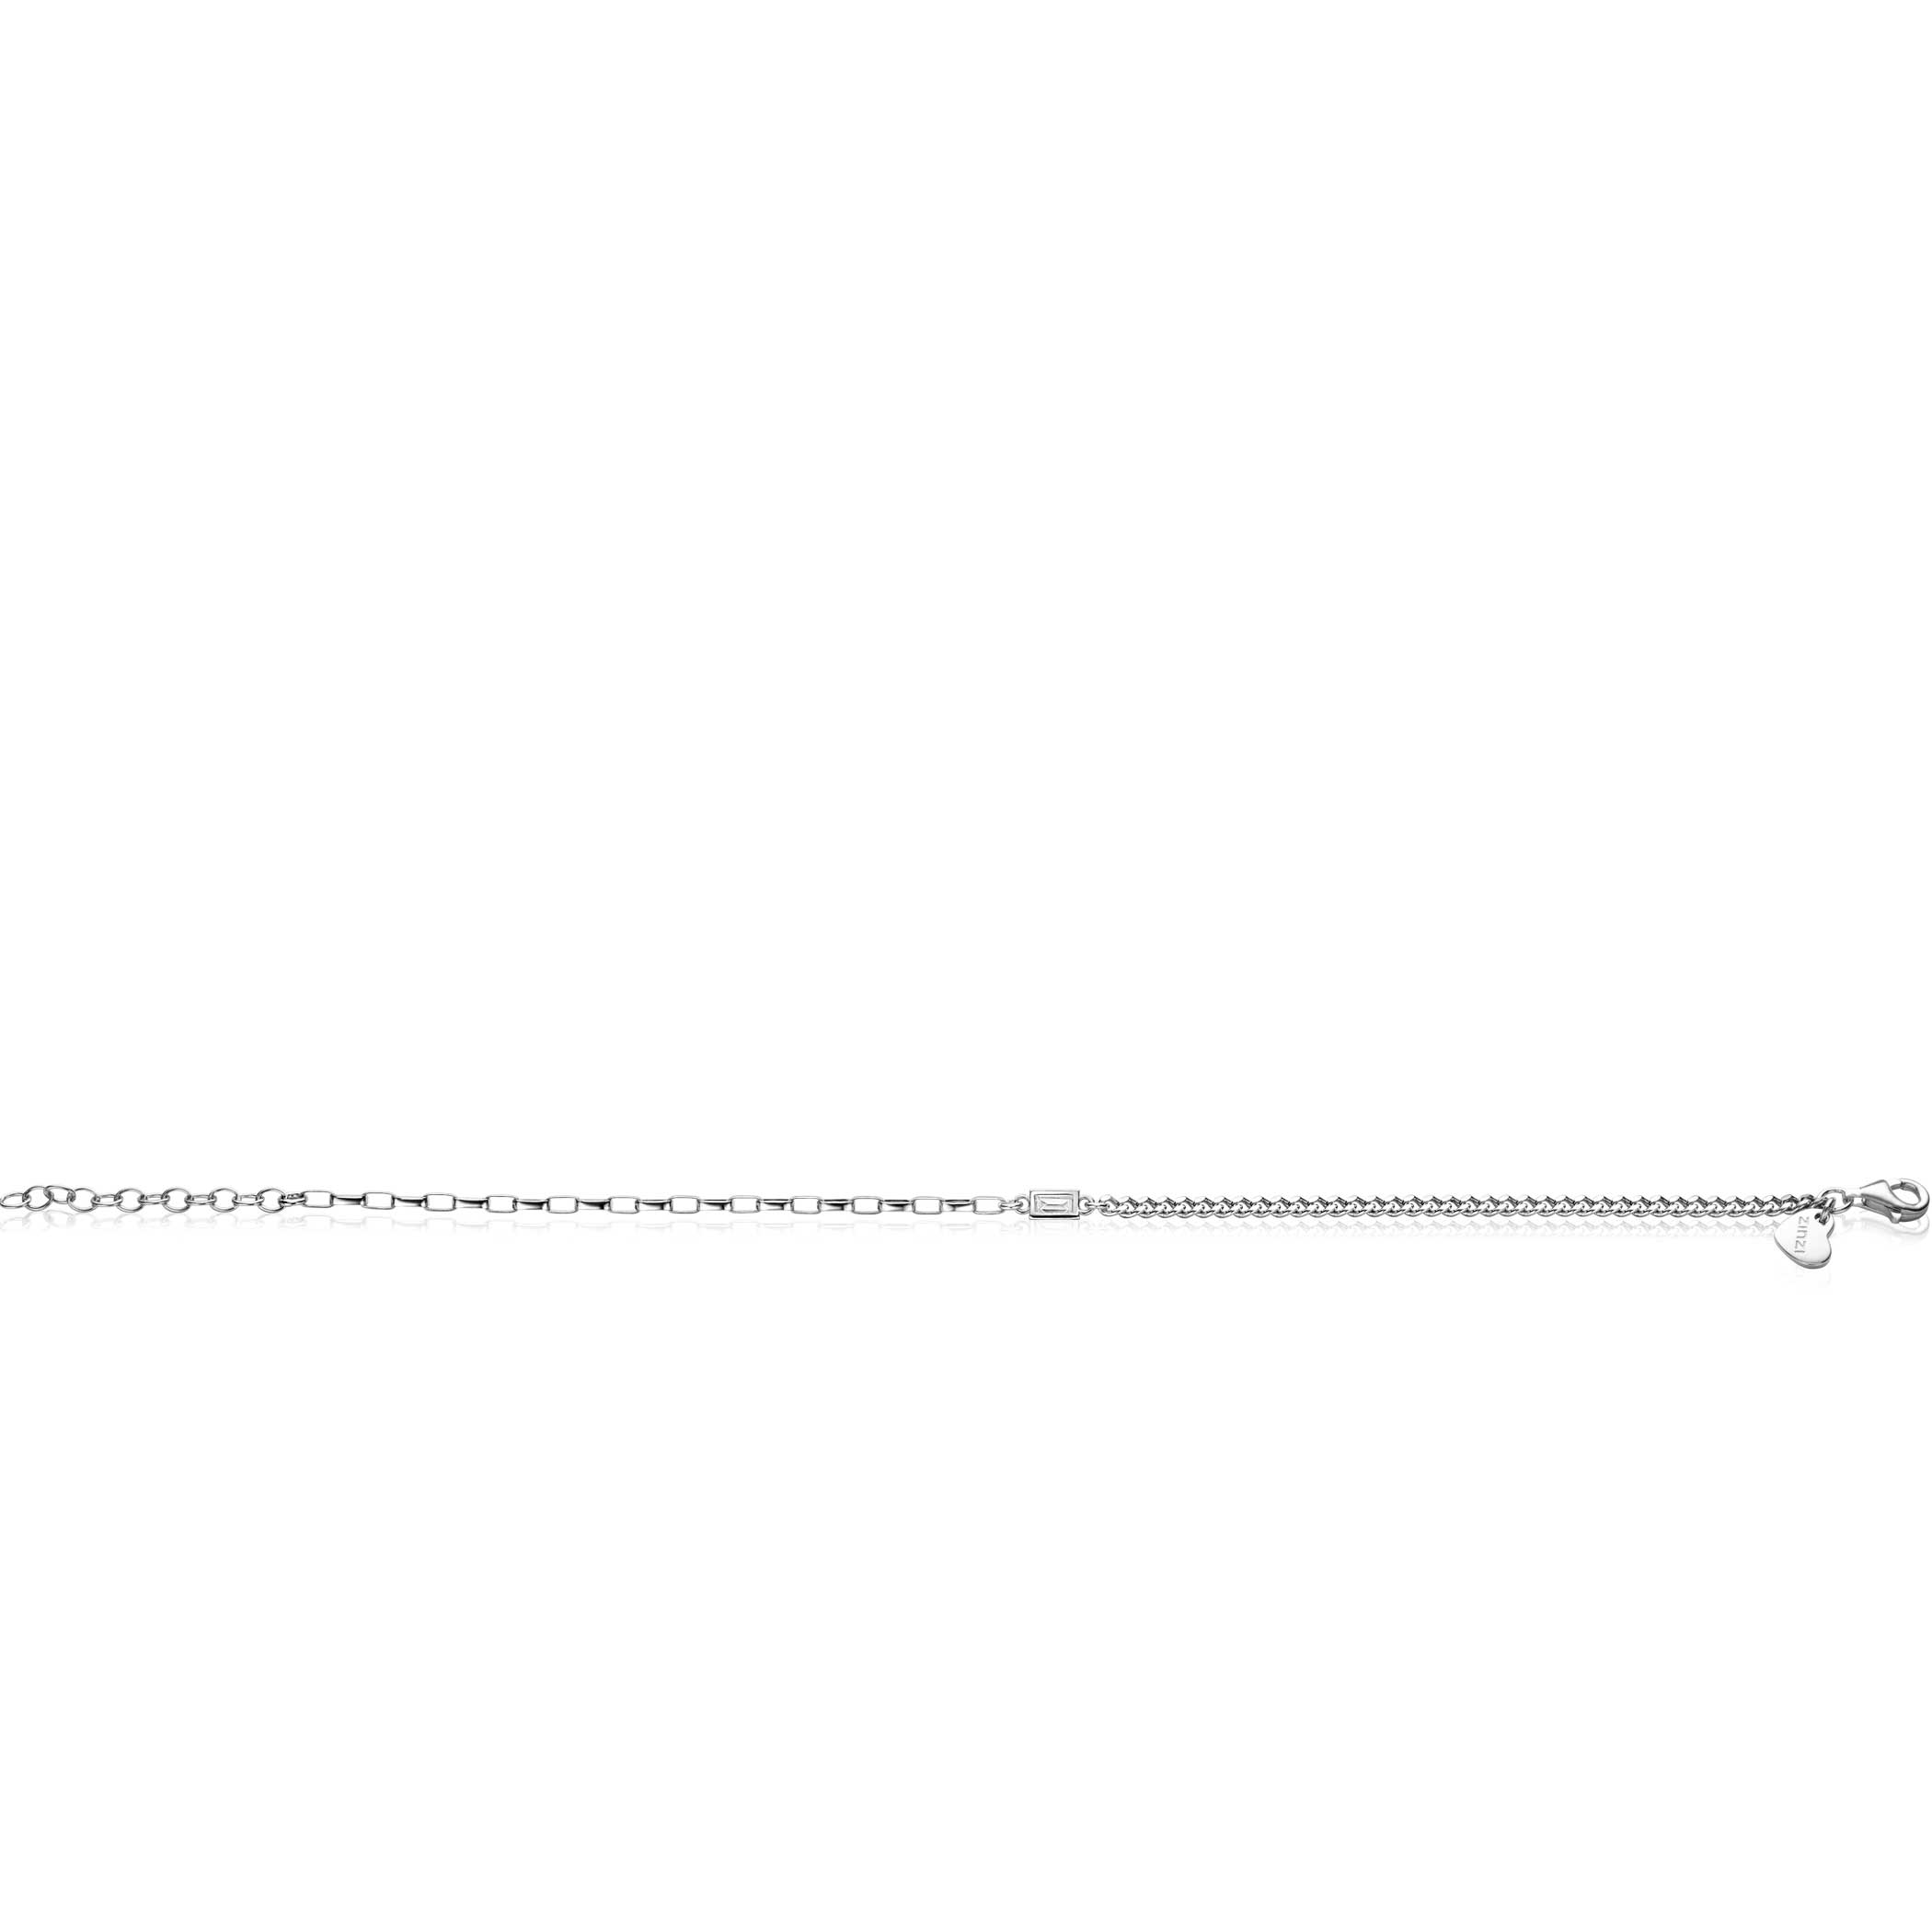 ZINZI Sterling Silver Chain Bracelet Curb and Square Chain with Rectangular Setting with White Zirconia 16,5-19,5cm ZIA2519